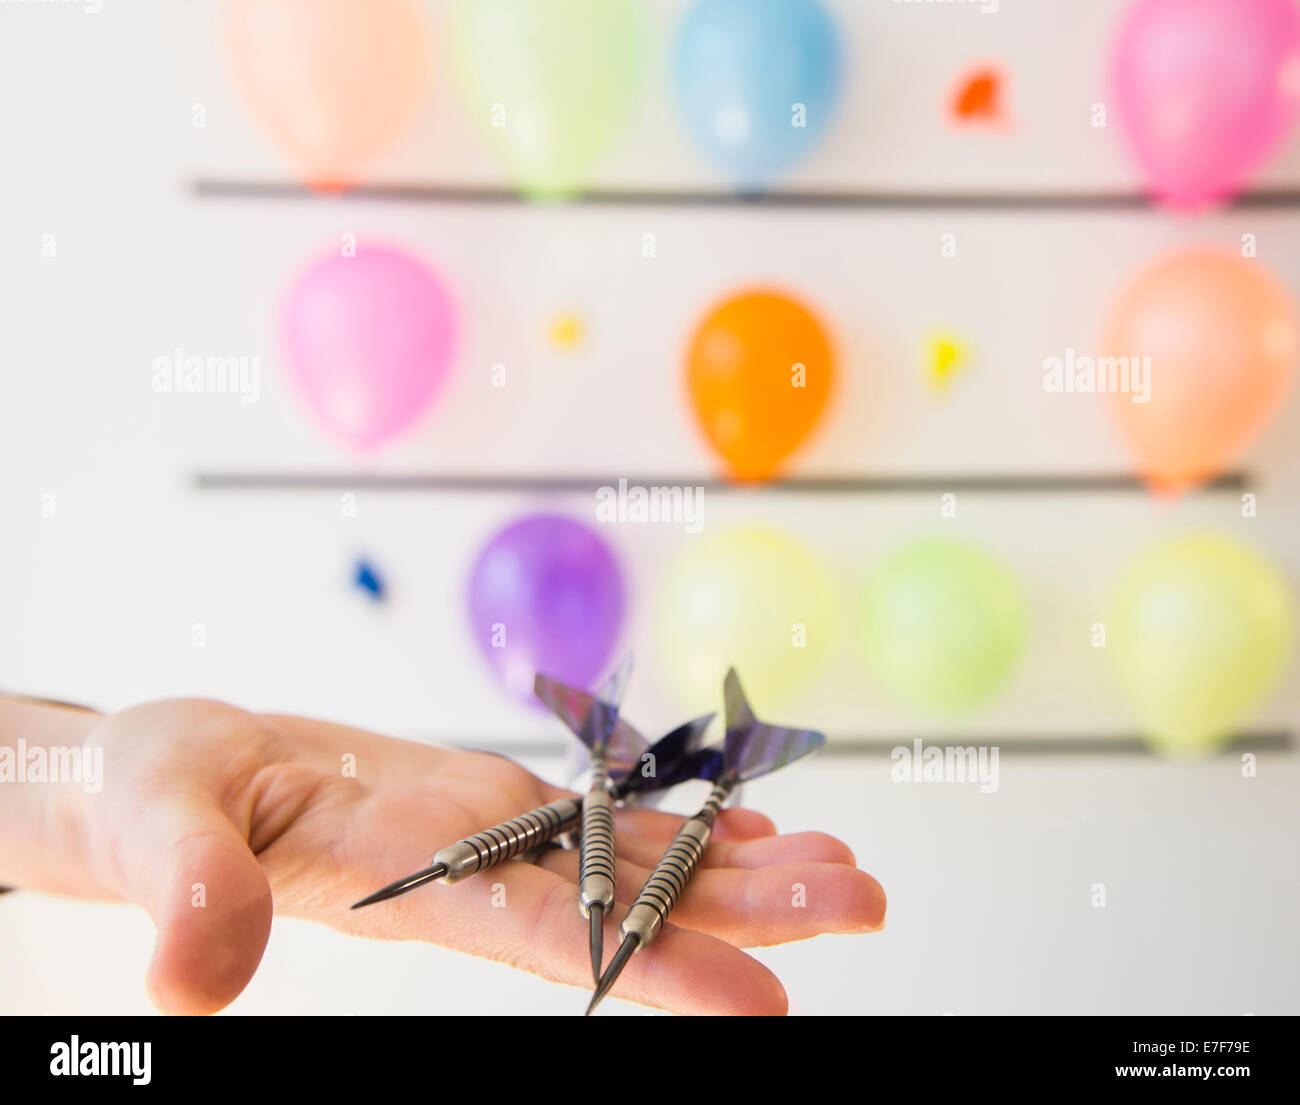 African American woman holding darts by wall of balloons Stock Photo